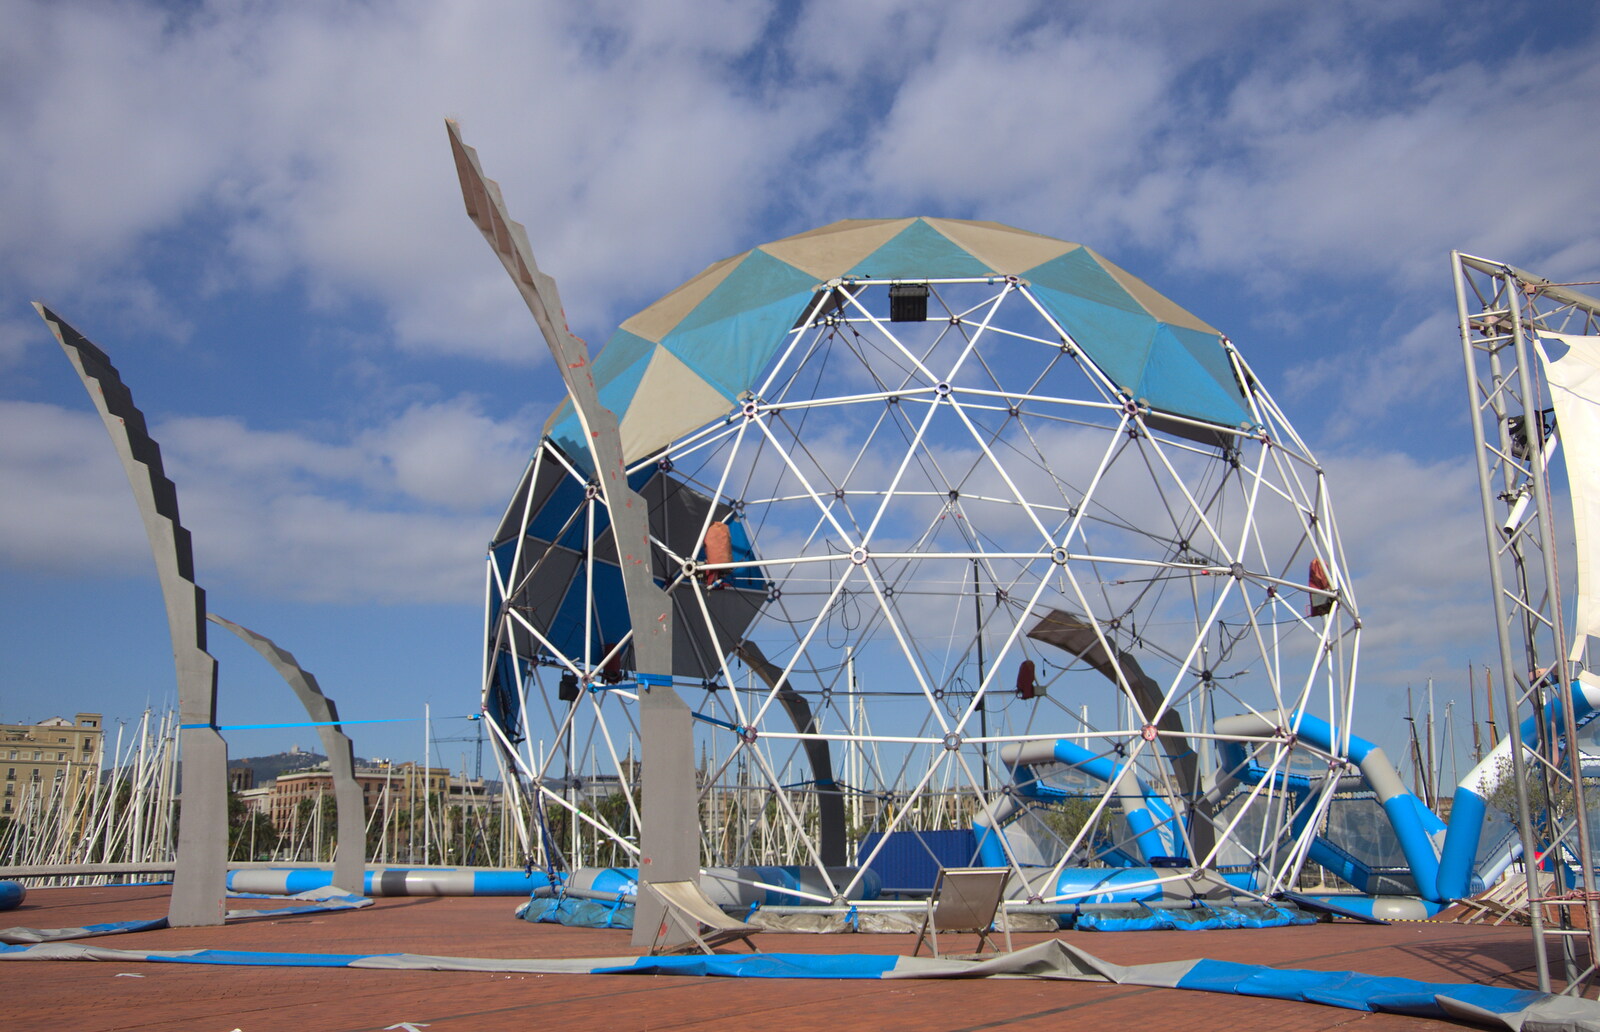 A geodesic dome from L'Aquarium de Barcelona, Port Vell, Catalonia, Spain - 23rd October 2017